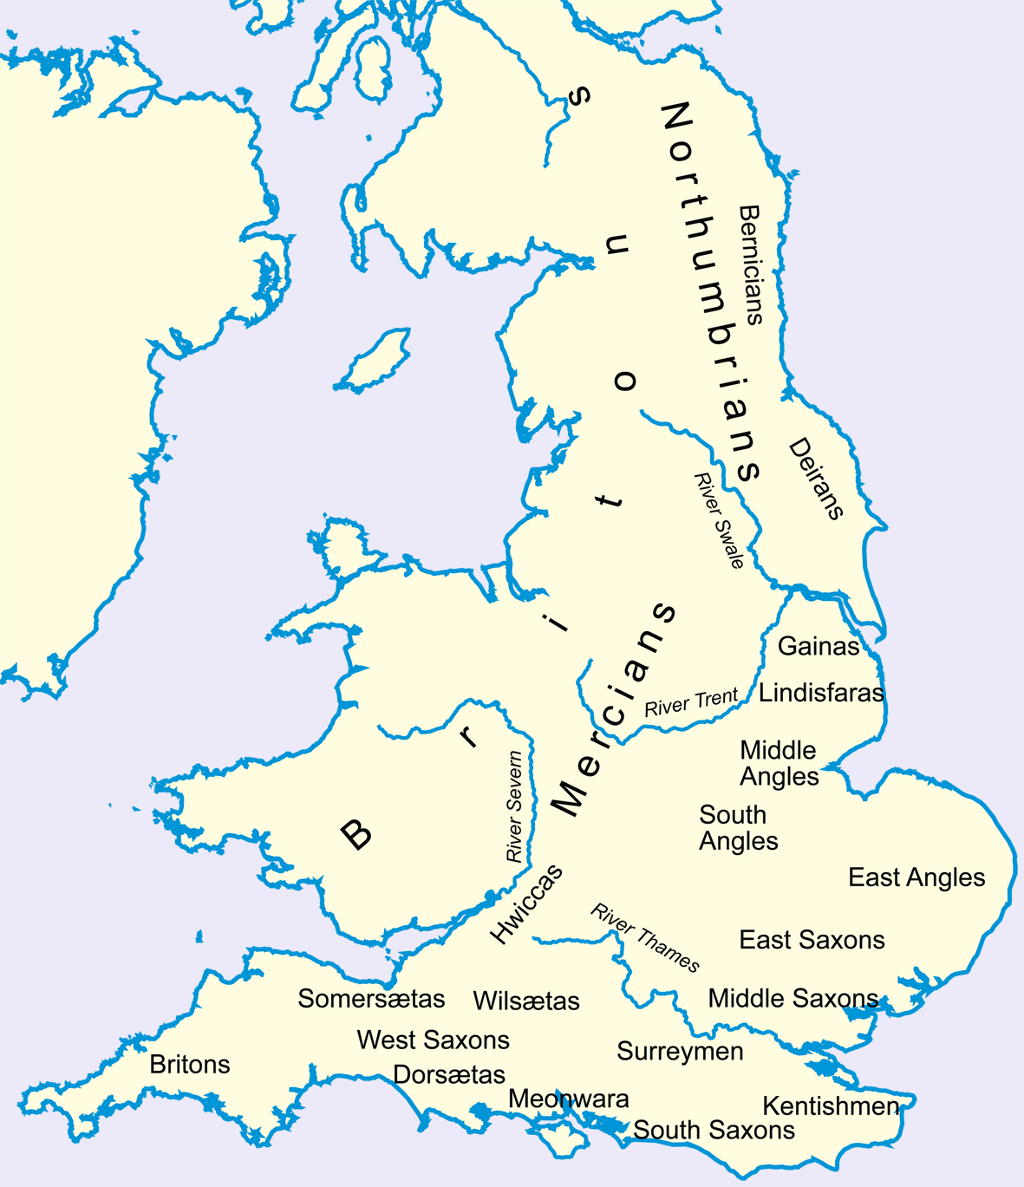 Map of peoples in Britain circa 600. Illustration.